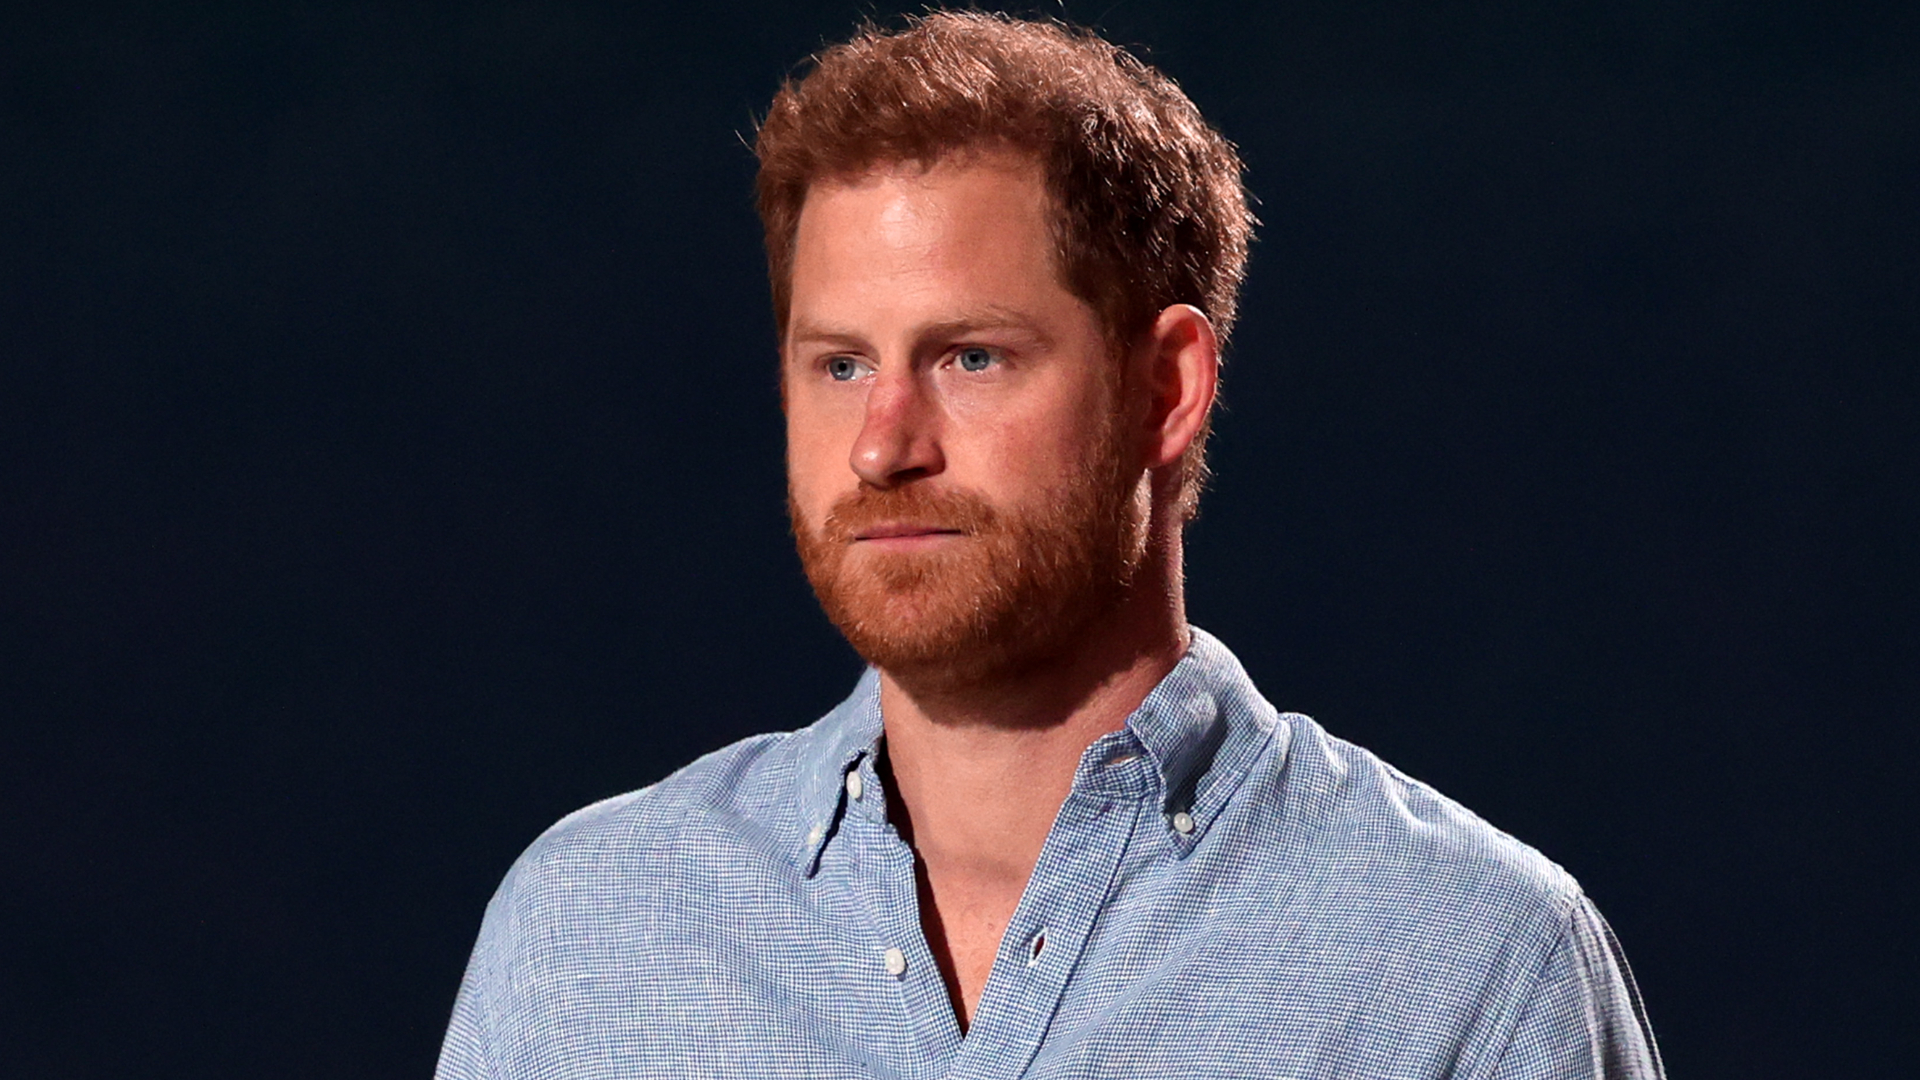 Prince Harry would be willing to work with the royal family again, on one condition